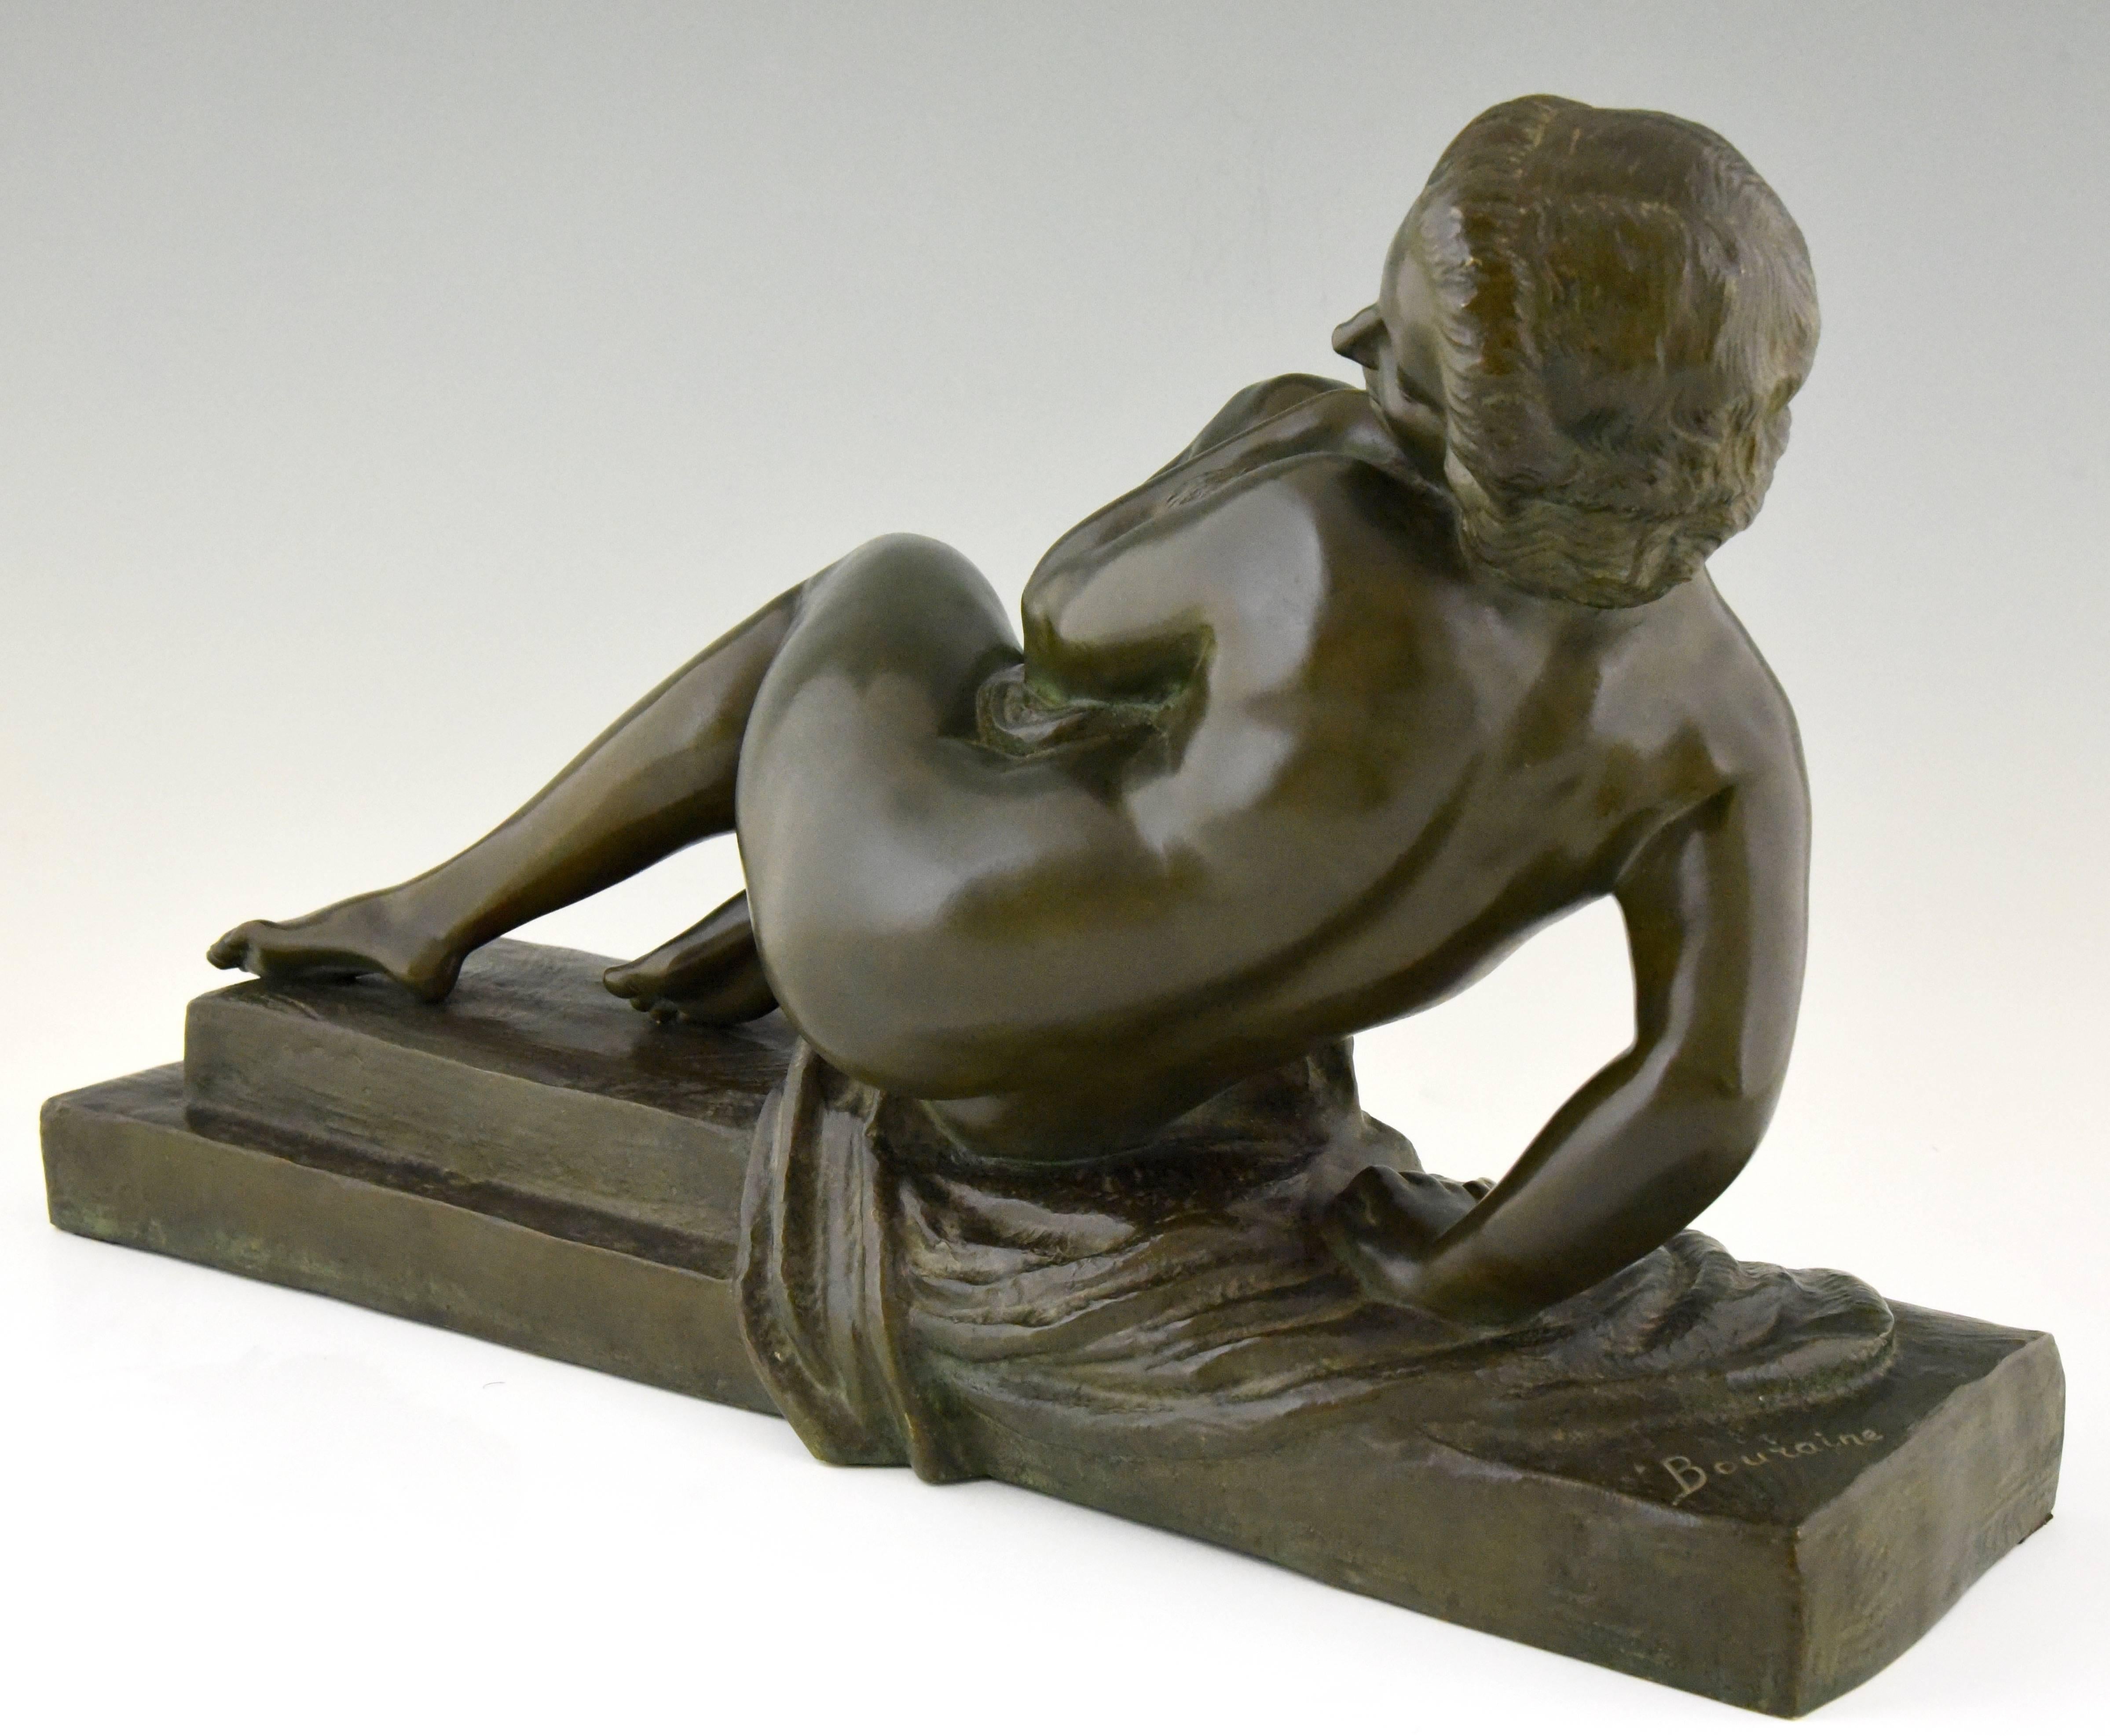 French Art Deco Bronze Sculpture of a Nude with Drape Marcel Bouraine, 1930 France